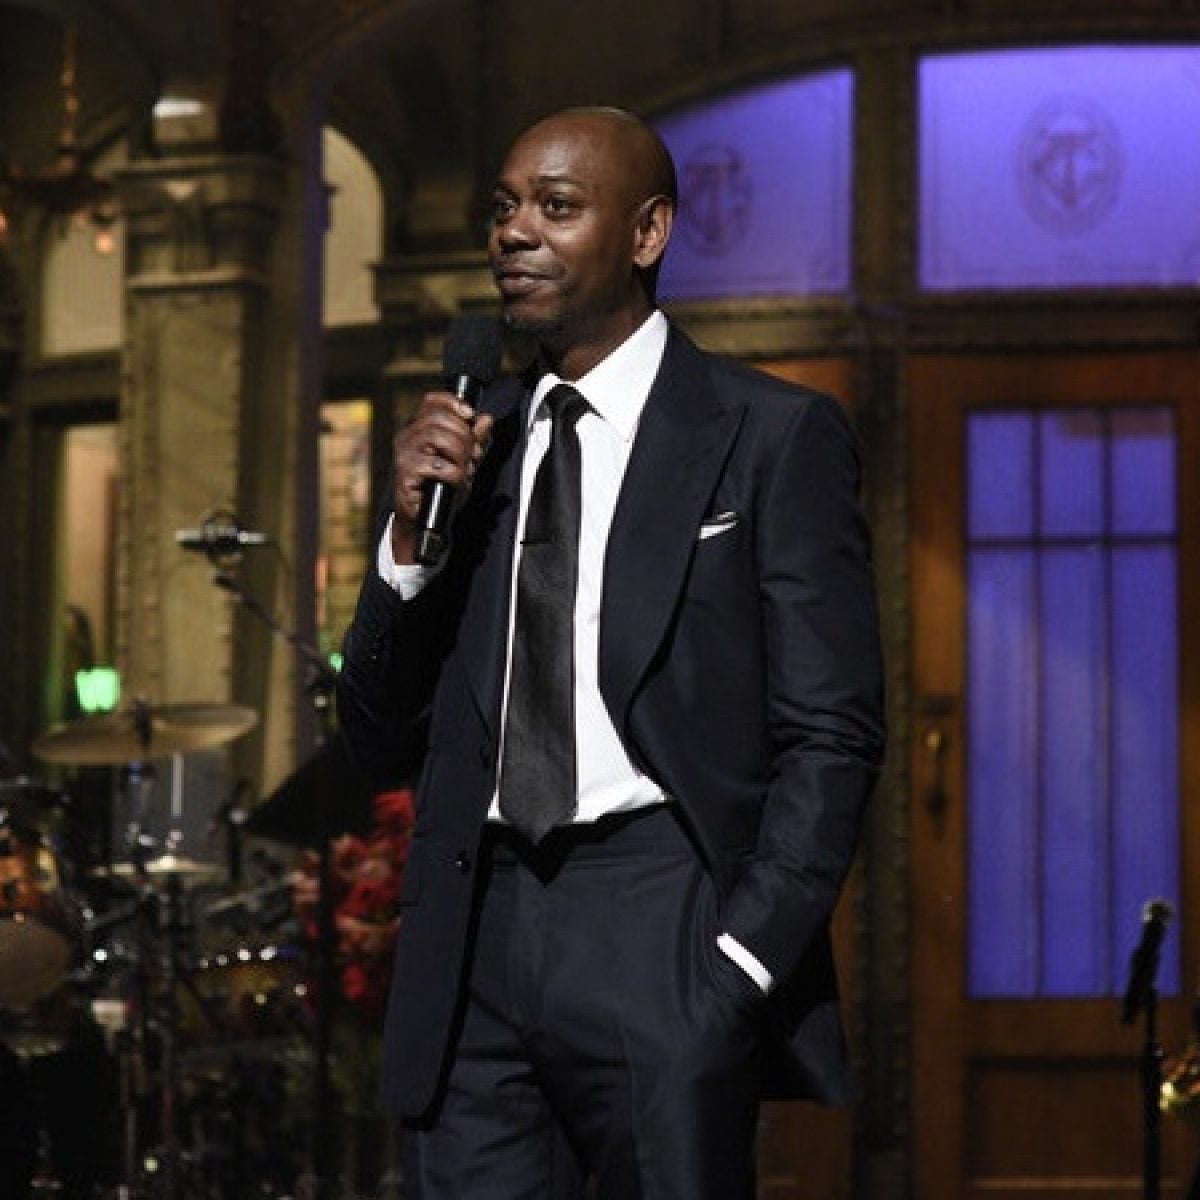 Dave Chappelle Sounds The Racial Alarm With His 'Saturday Night Live' Post-Election Monologue